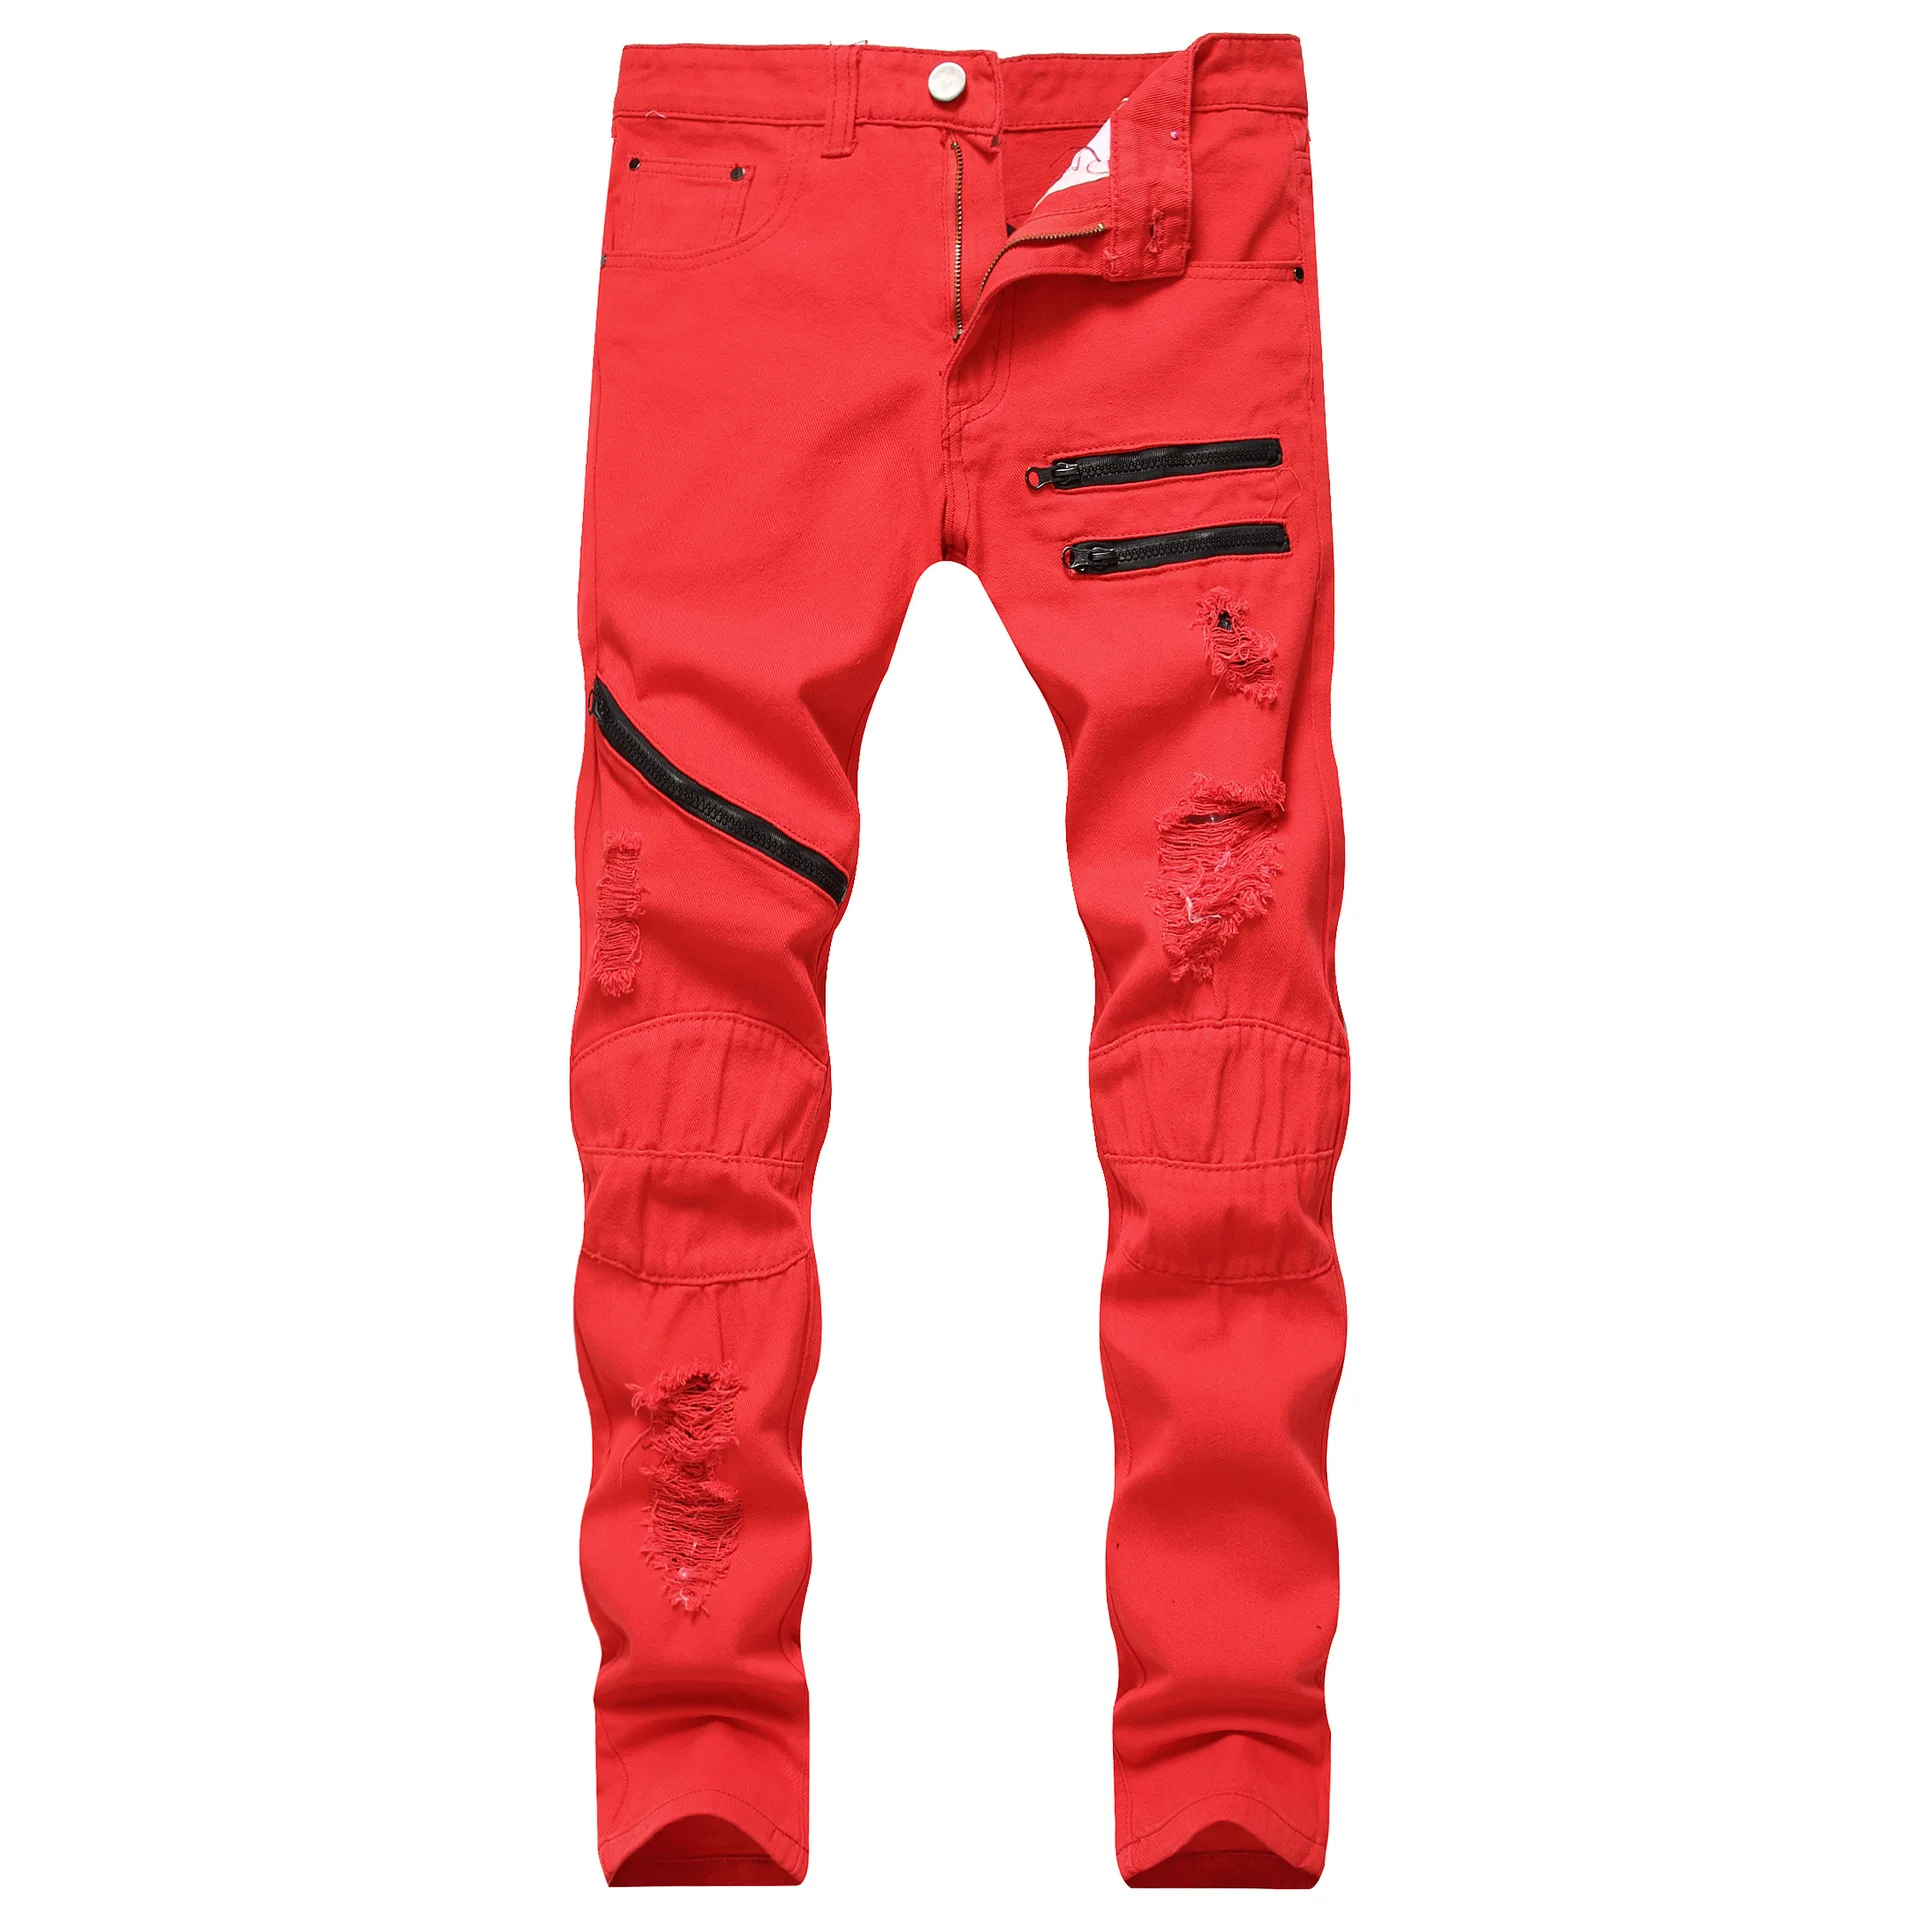 2021 Autumn New Mens Hole Denim Trousers Fashion Ripped Red Jeans Hip Hop Vintage Skinny Jeans Man Zip Up Casual Jean Homme 바지  - buy with discount